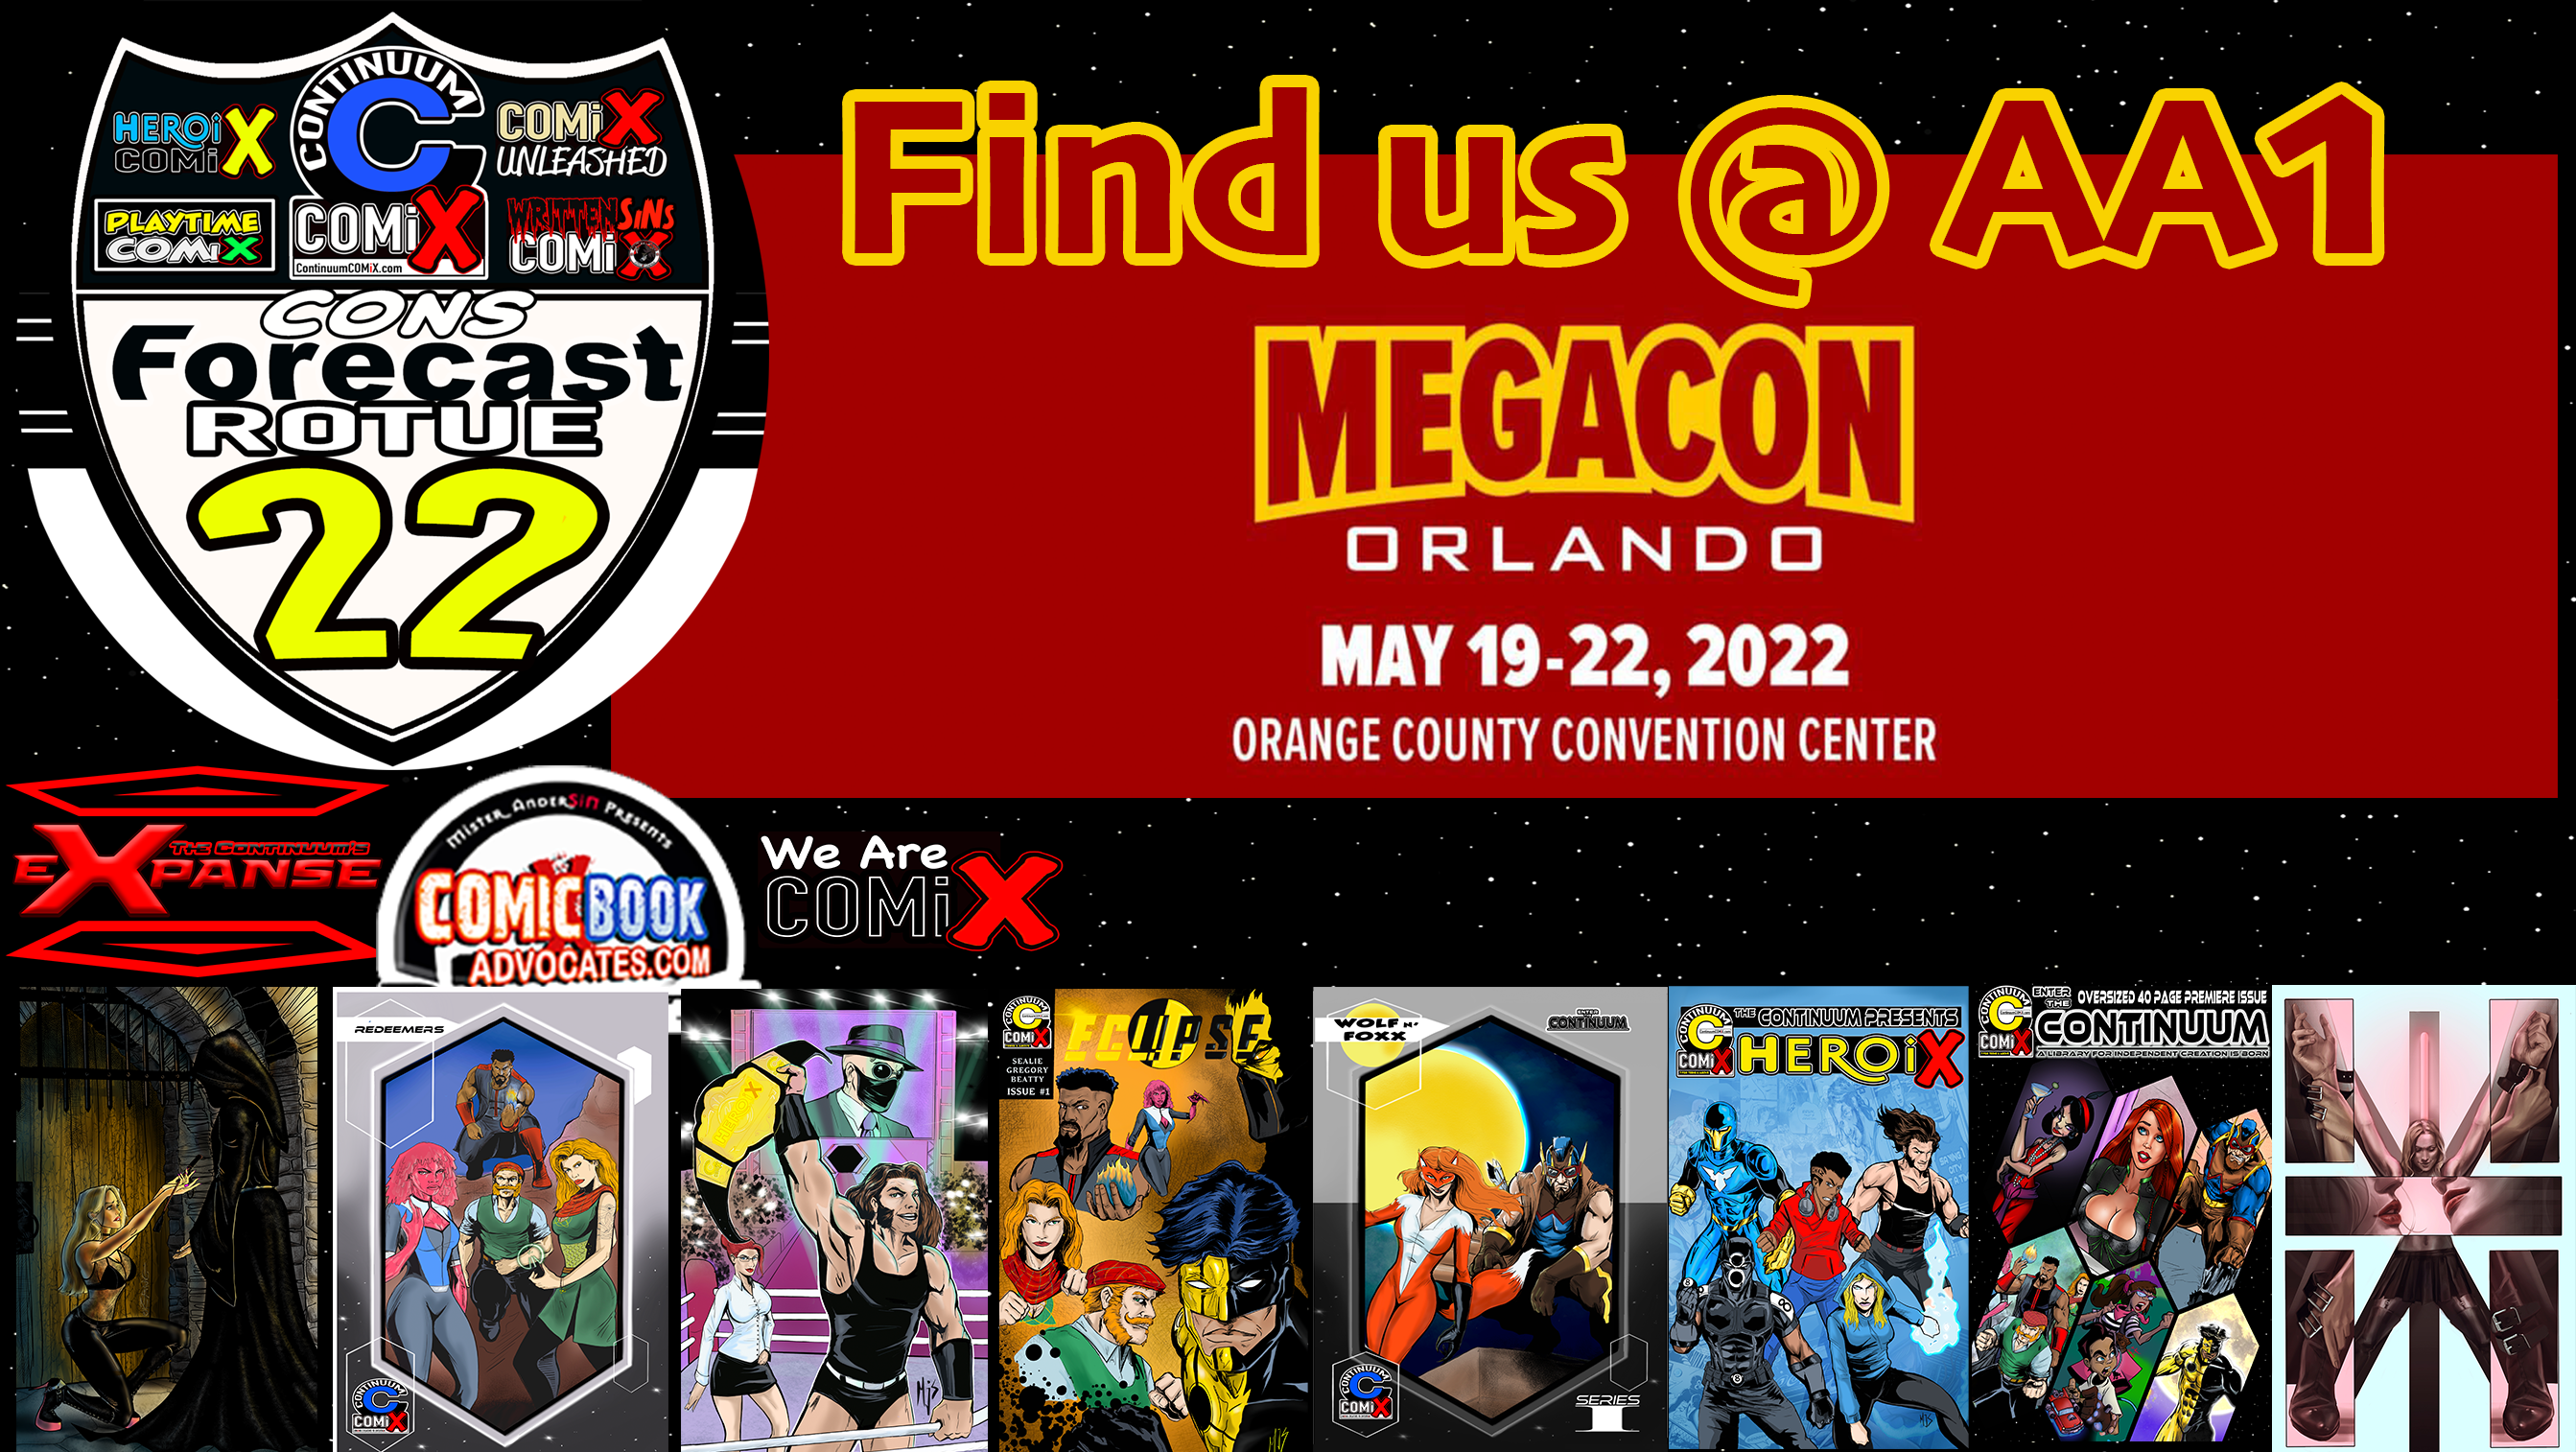 MEGA COMiXcon FORECAST for Week 20 of 2022